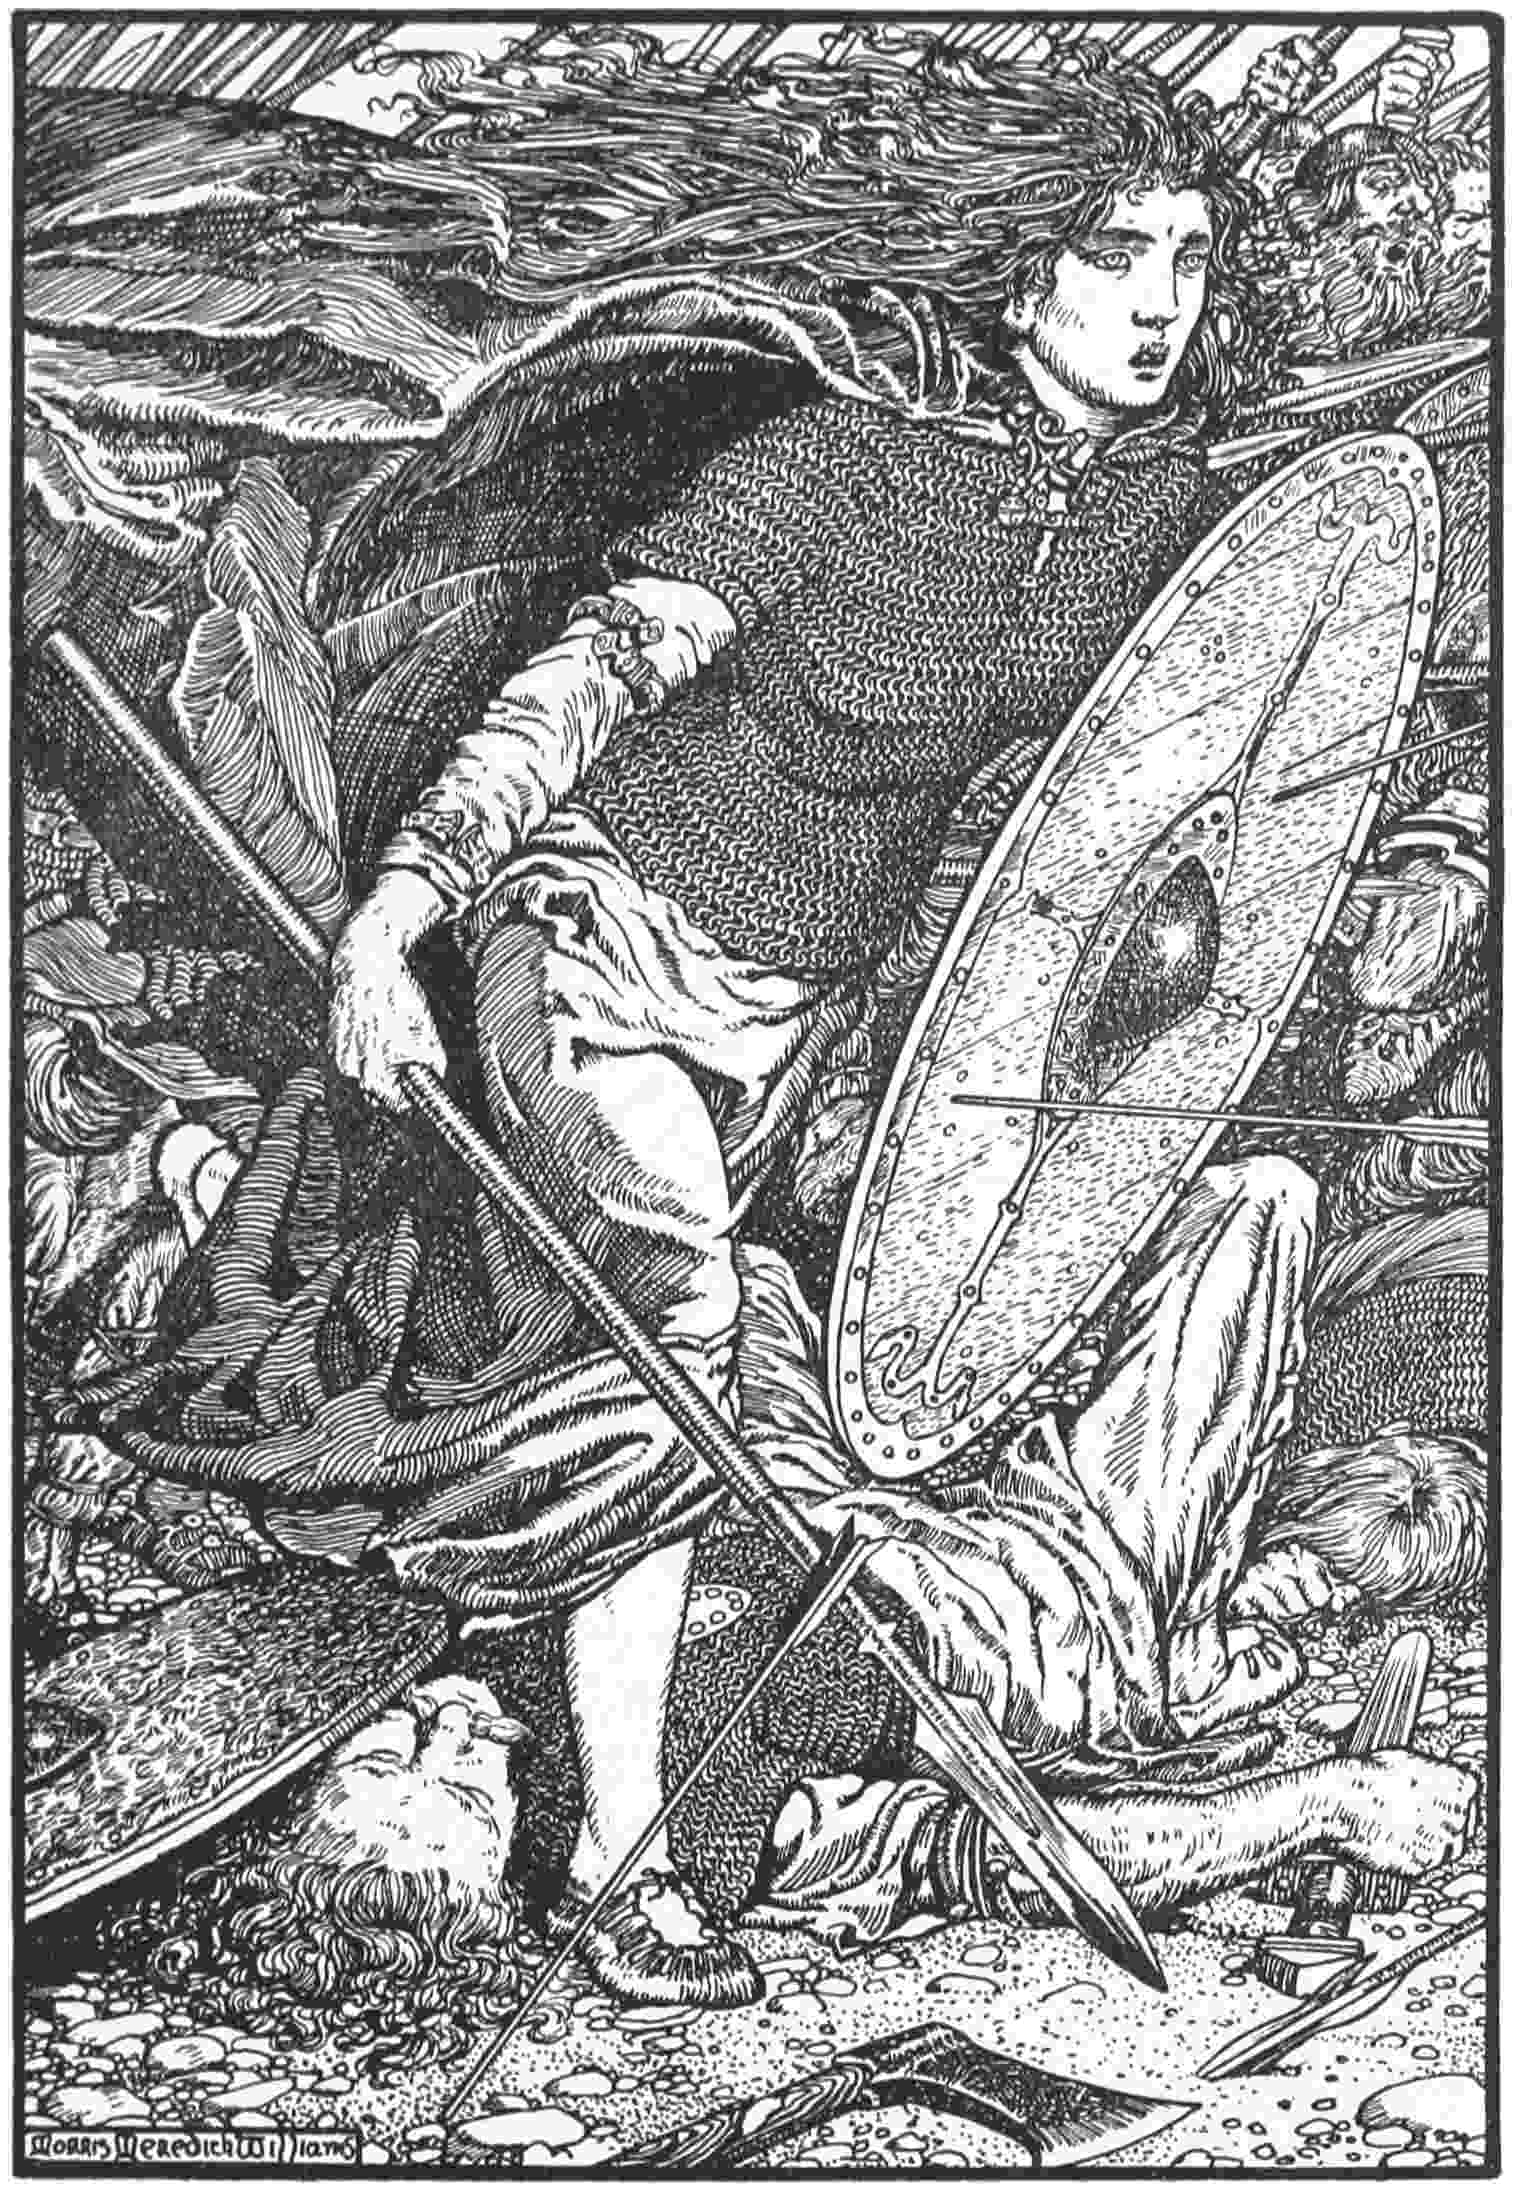 The Northmen In Britain, by Eleanor Hull—A Project Gutenberg eBook